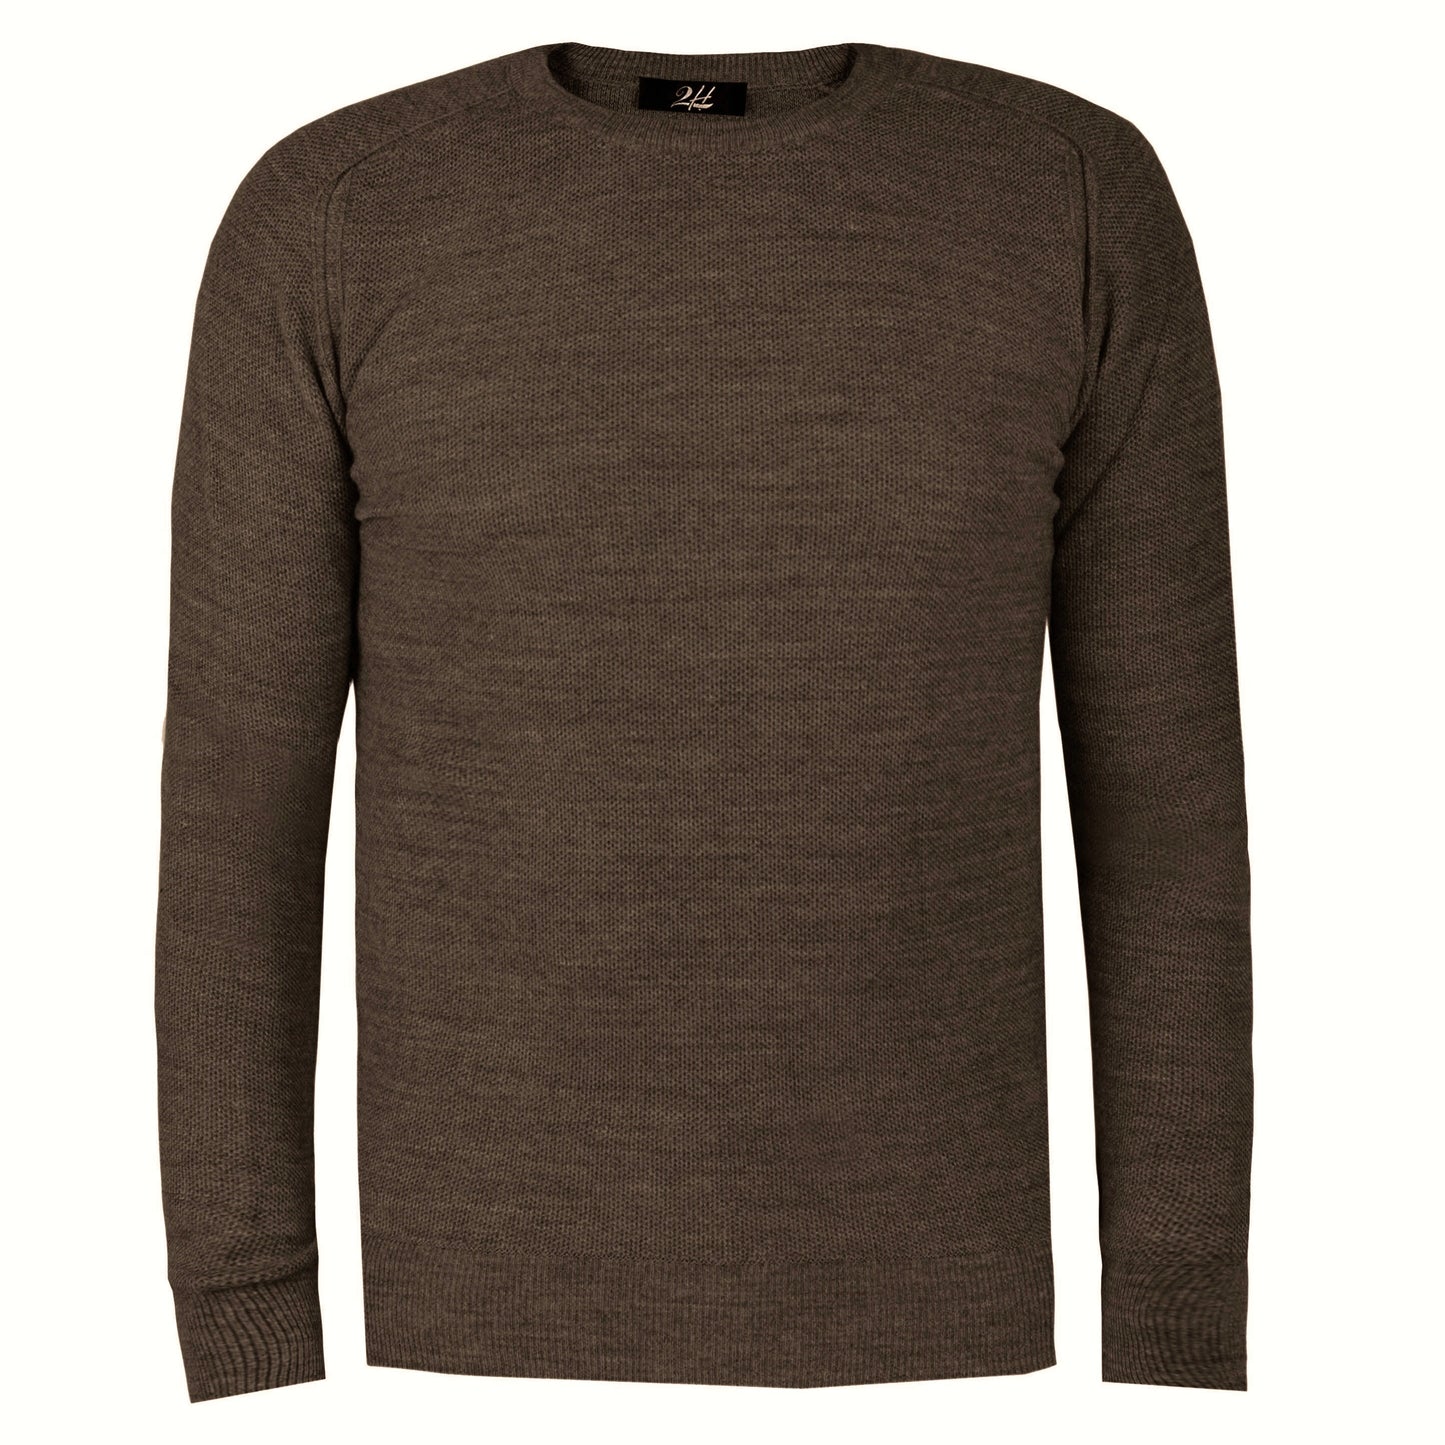 2H Brown Knitted Round Neck Sweater